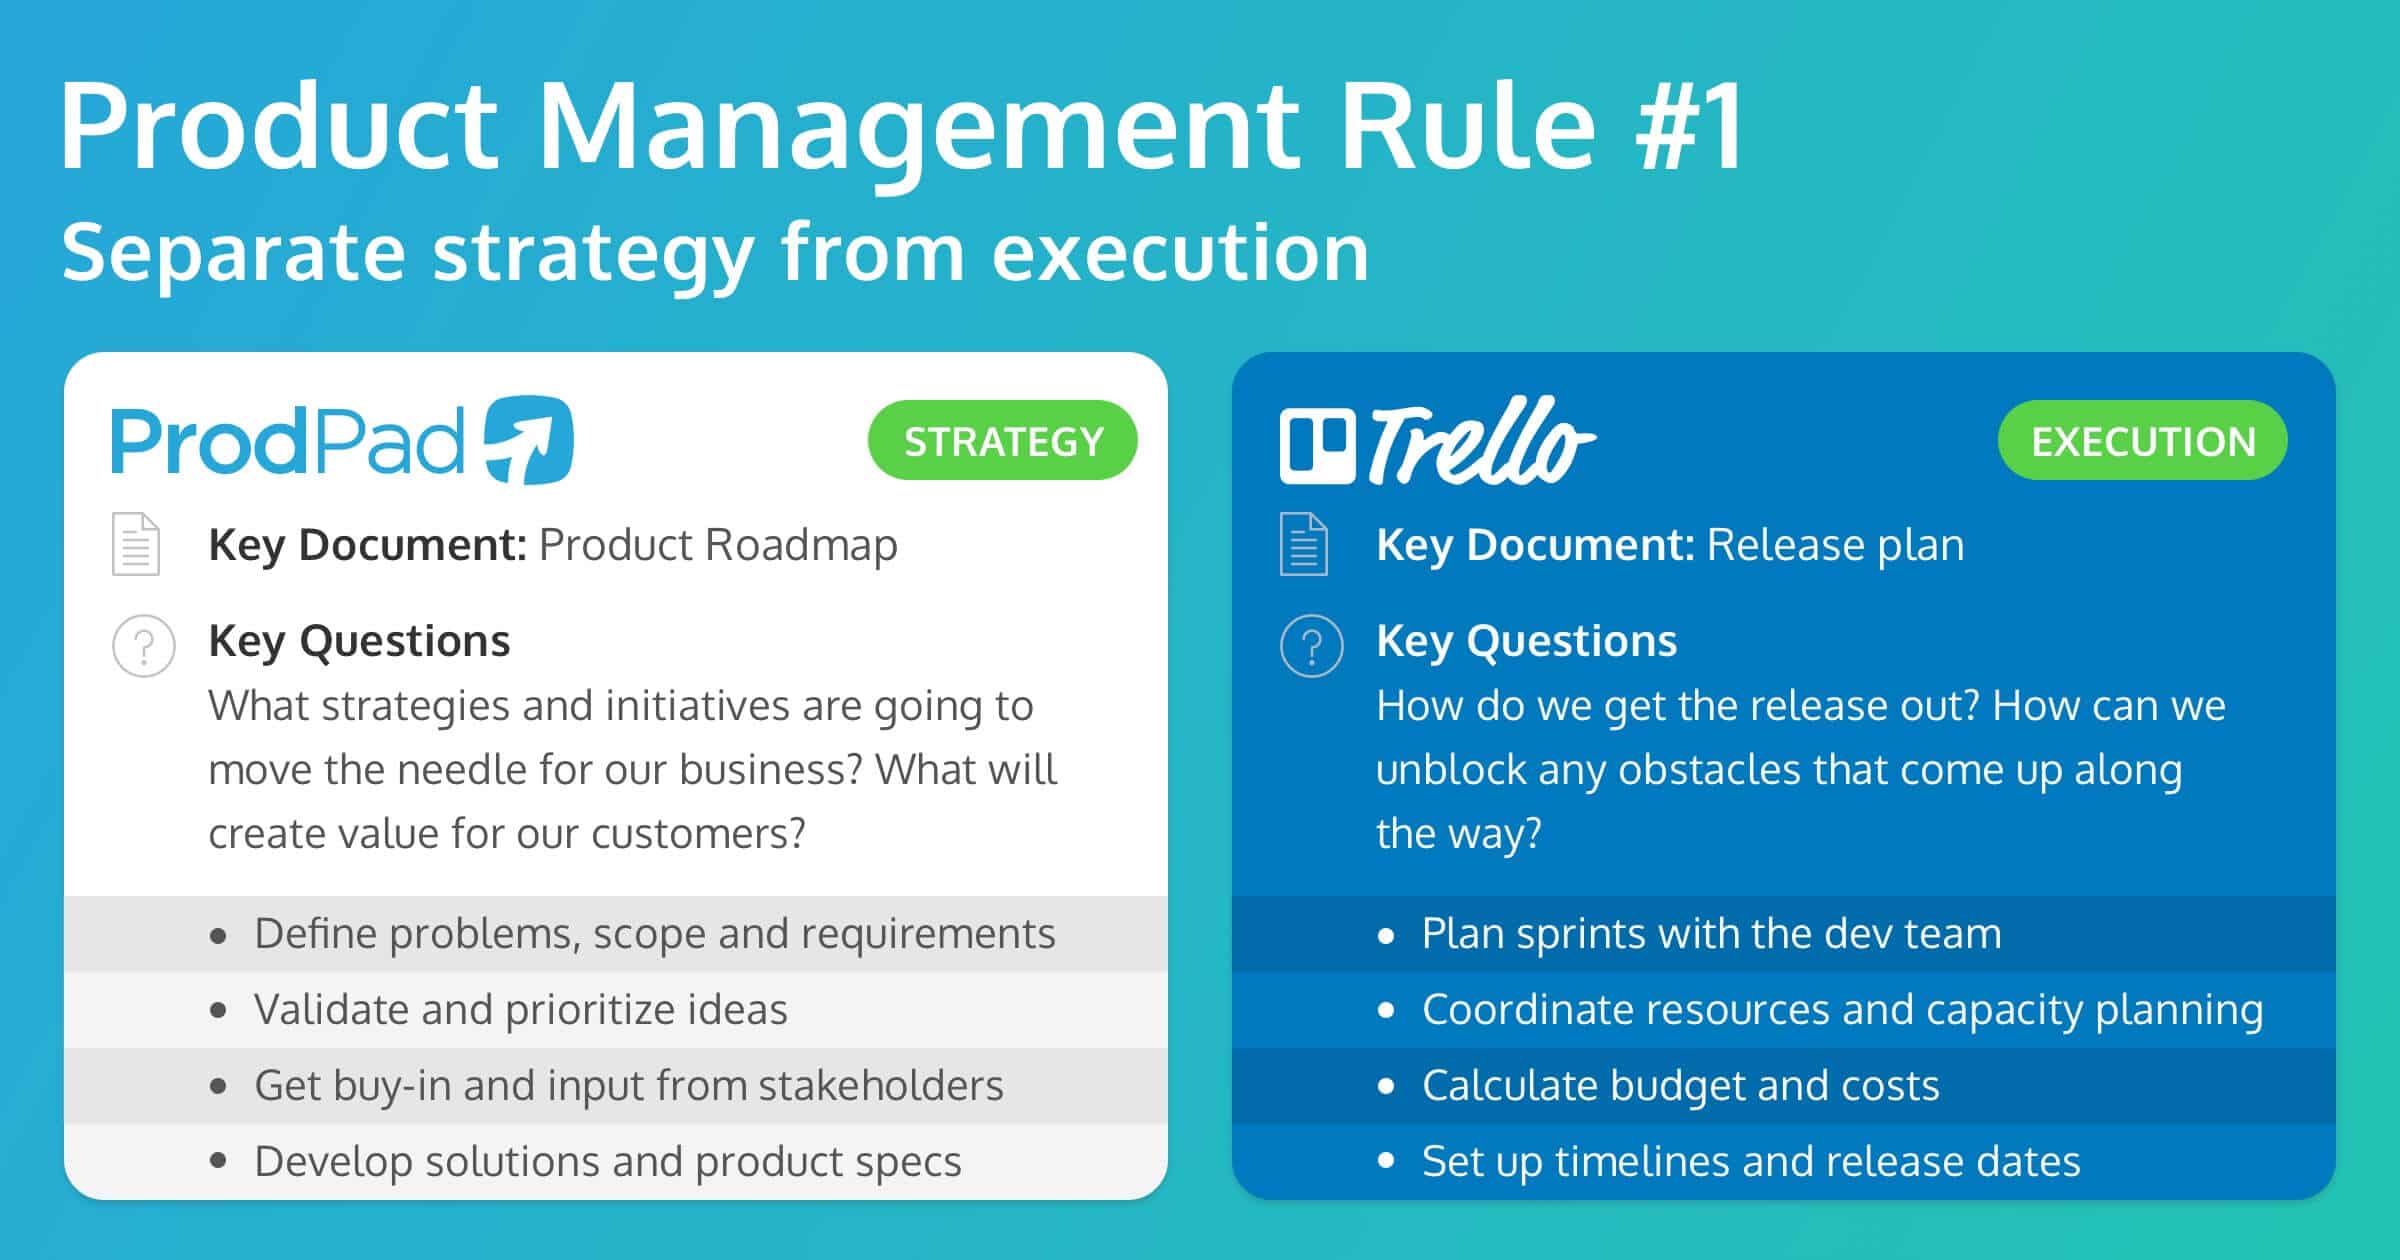 Separate strategy from execution